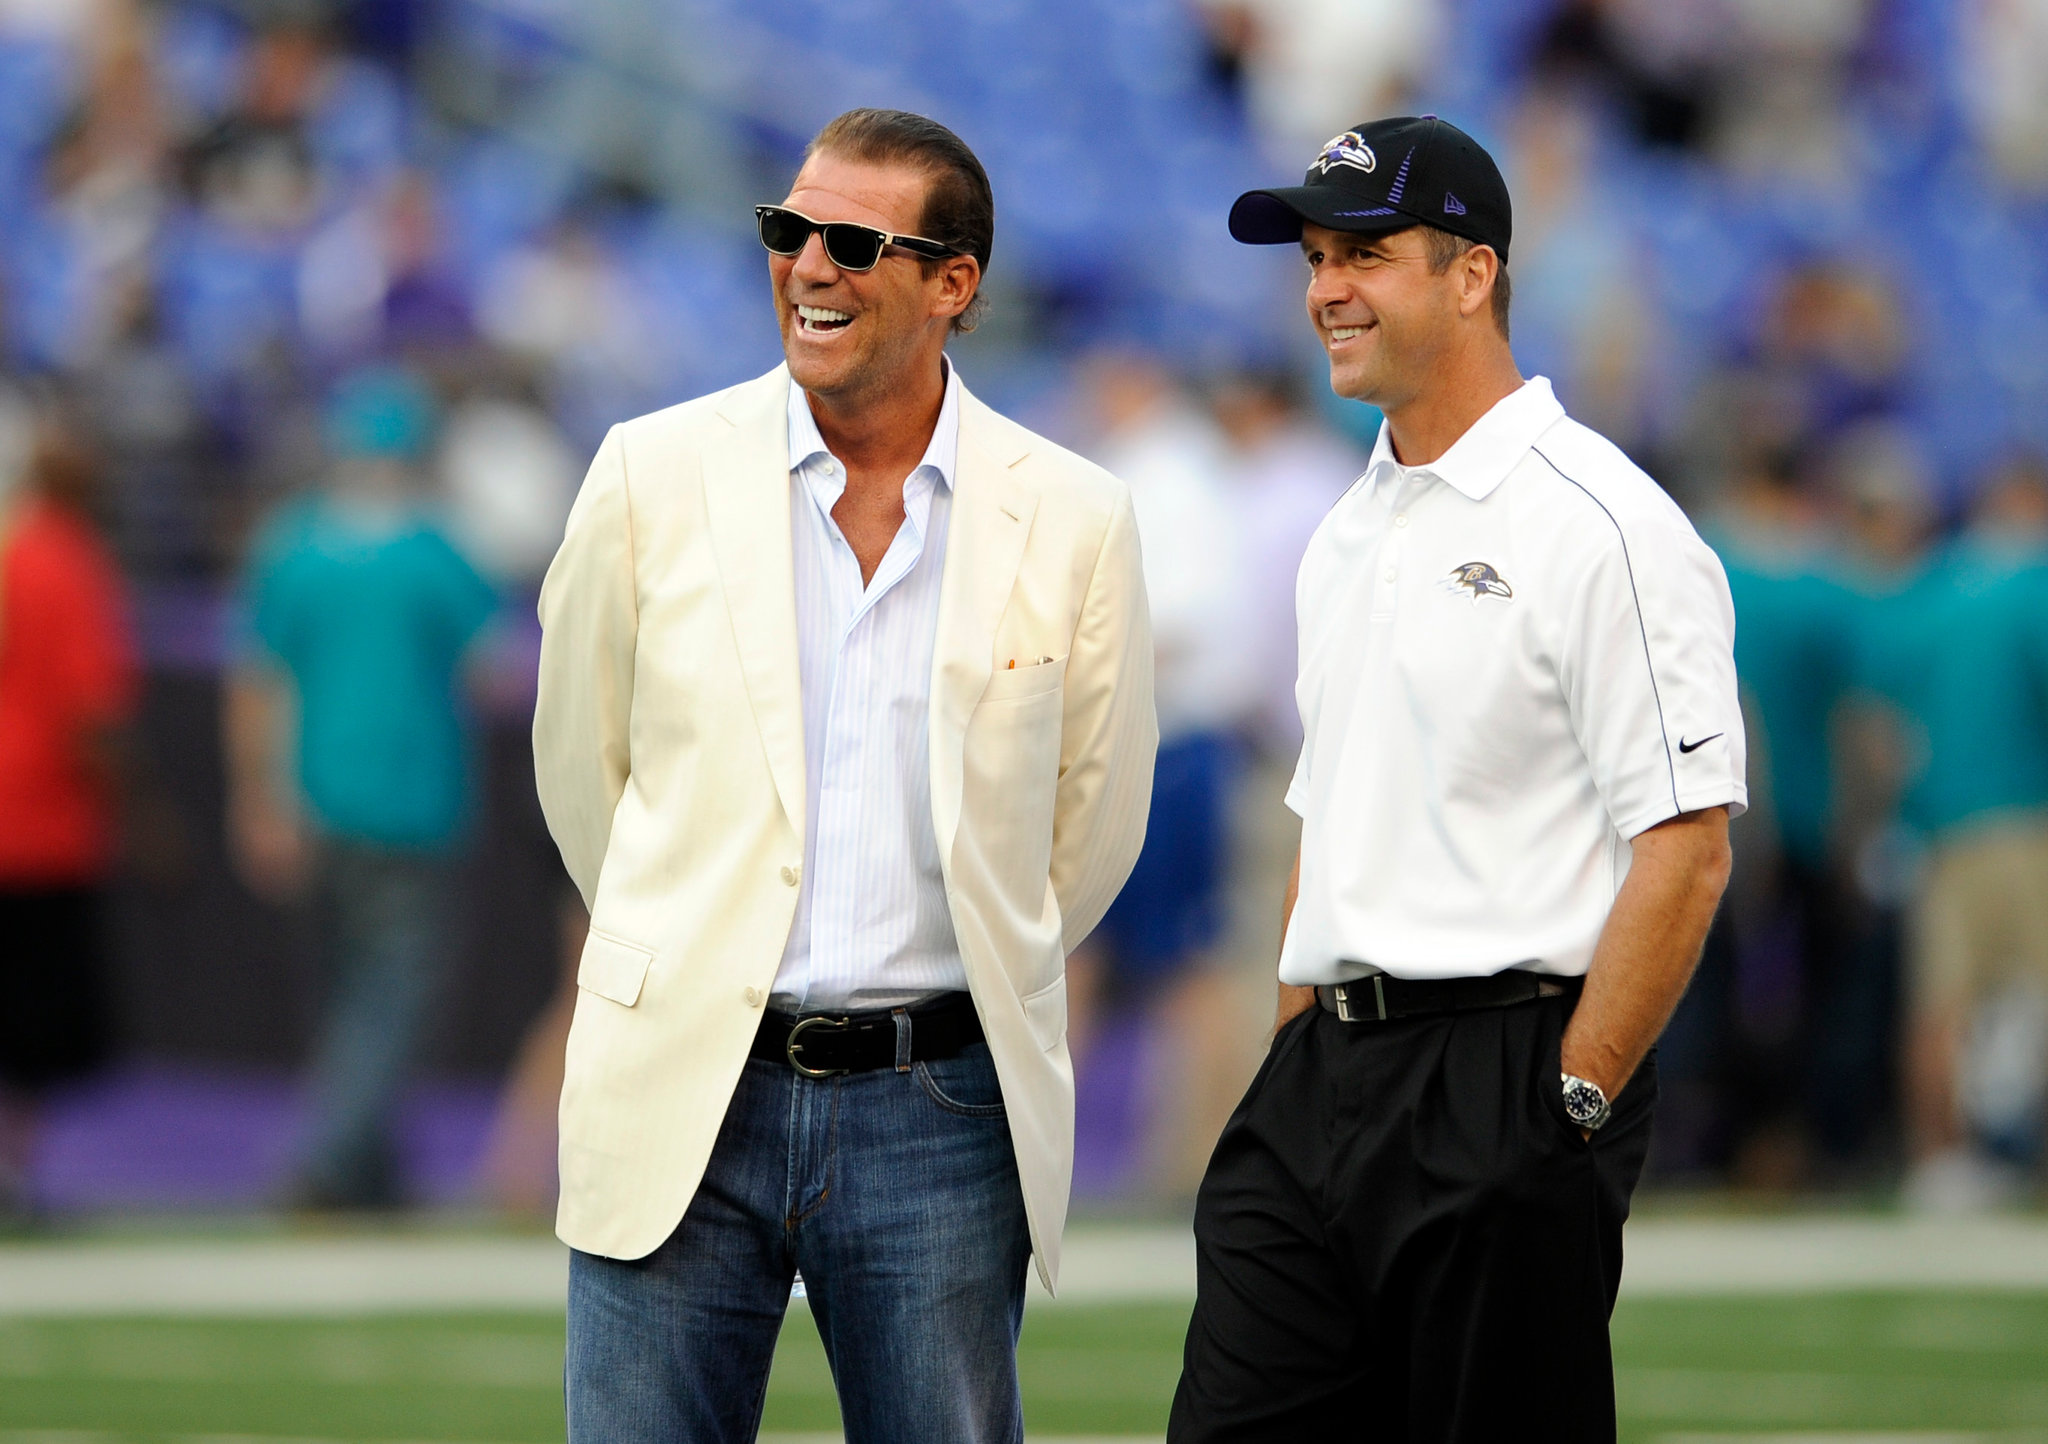 Steve Bisciotti A Man of Business and Community